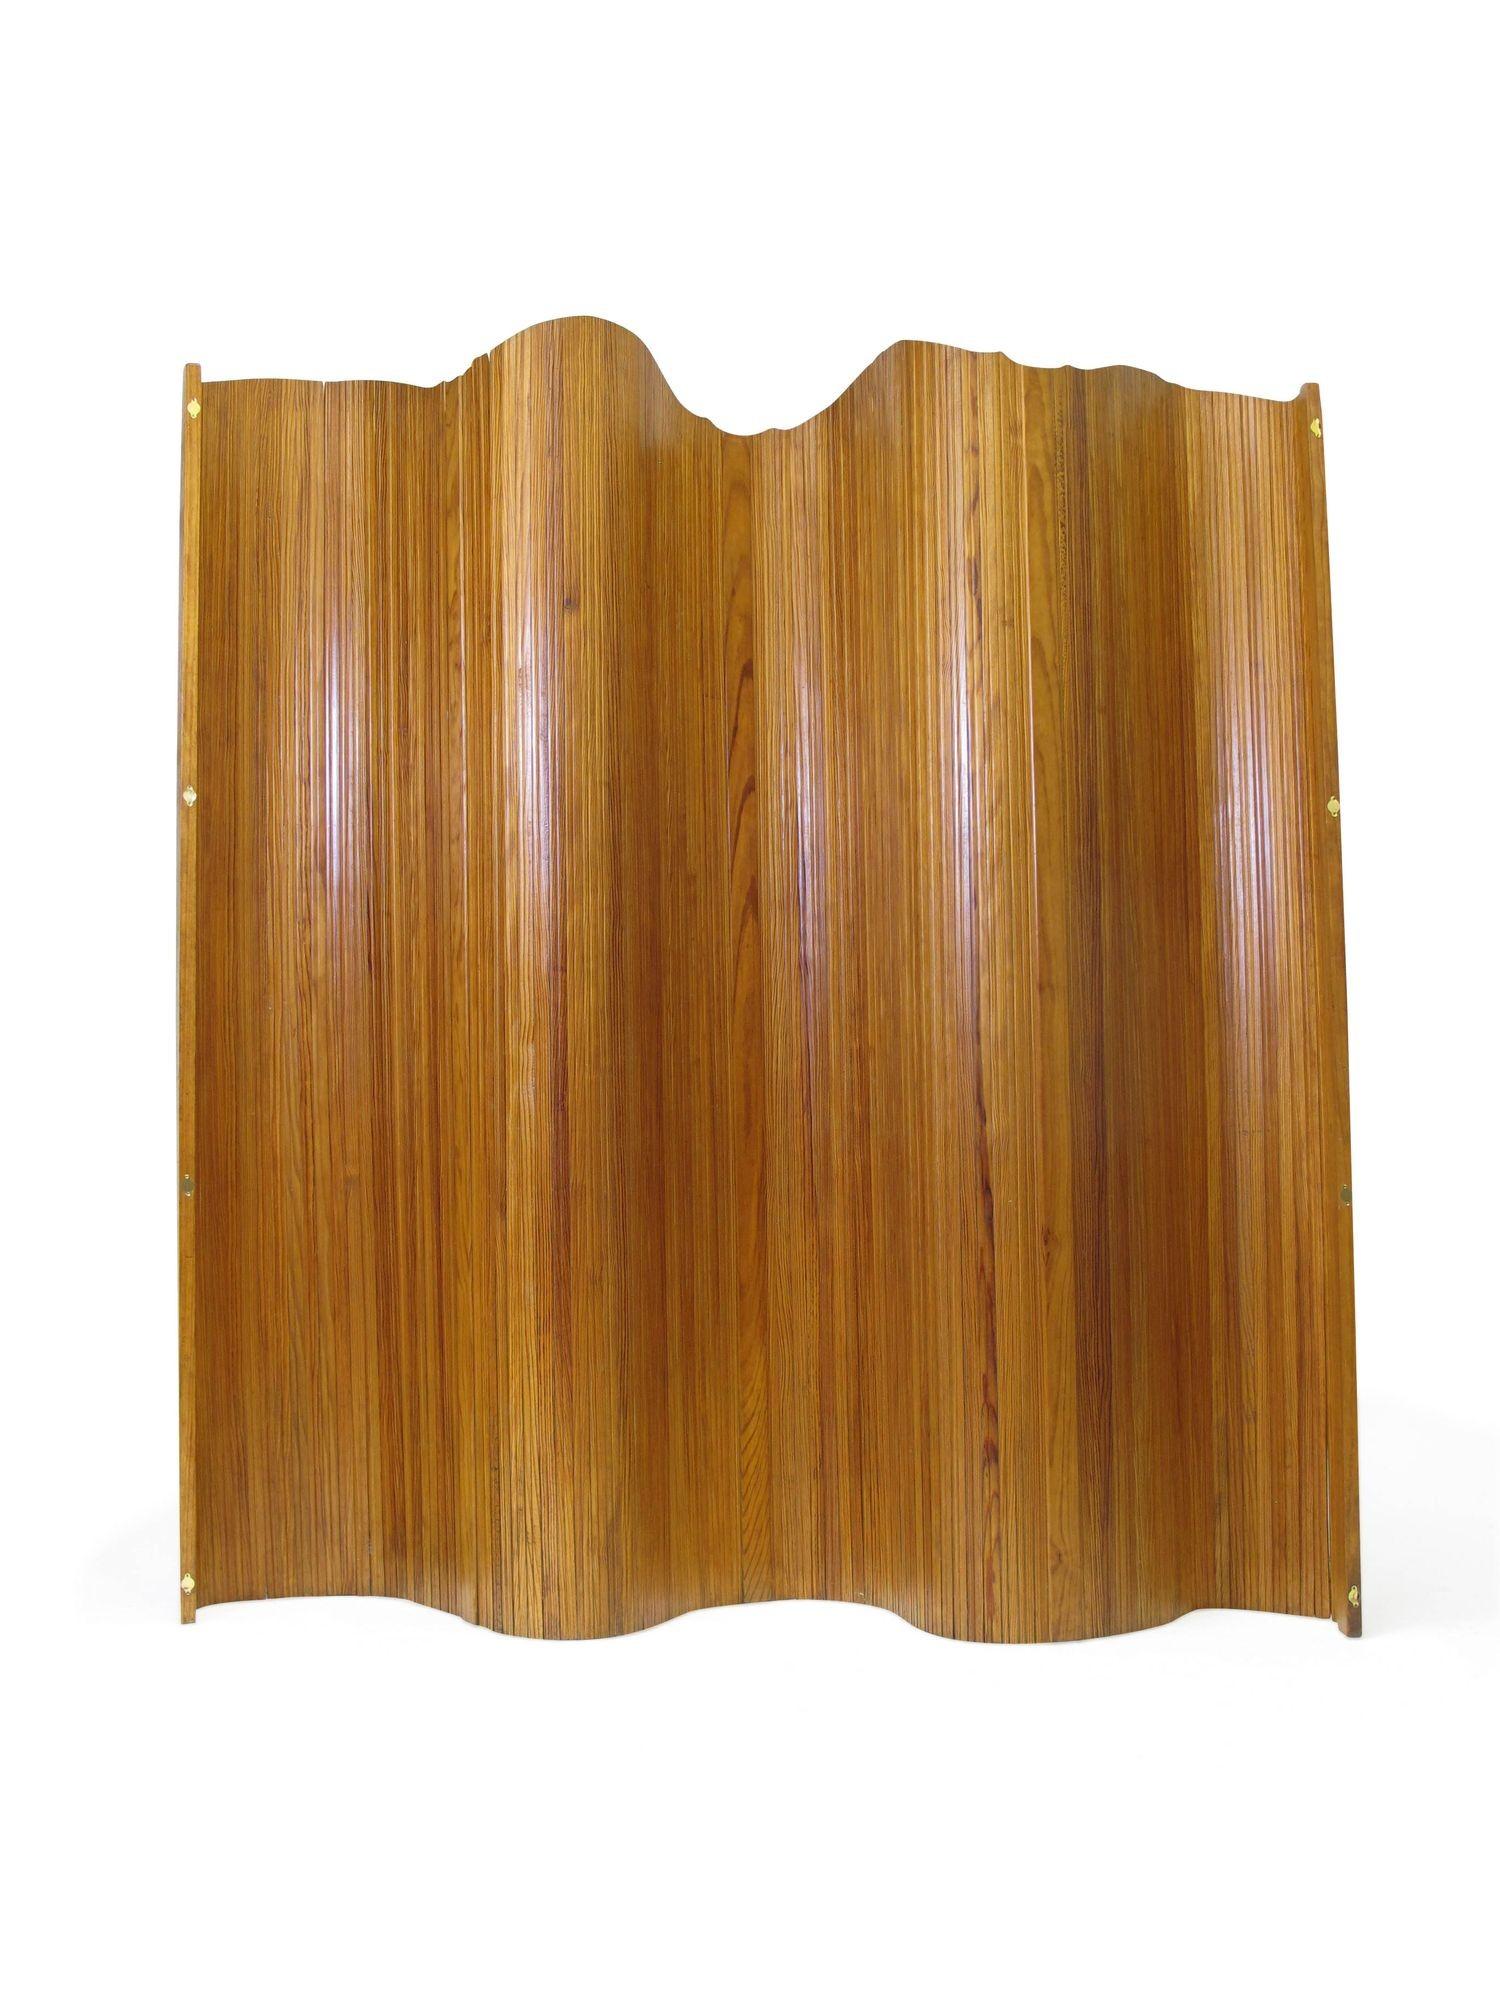 Jomaine Baumann, 1930s French Art Deco tambour room divider / folding screen crafted of heart pine, can be coiled and shaped into multiple positions to fit the space as needed.